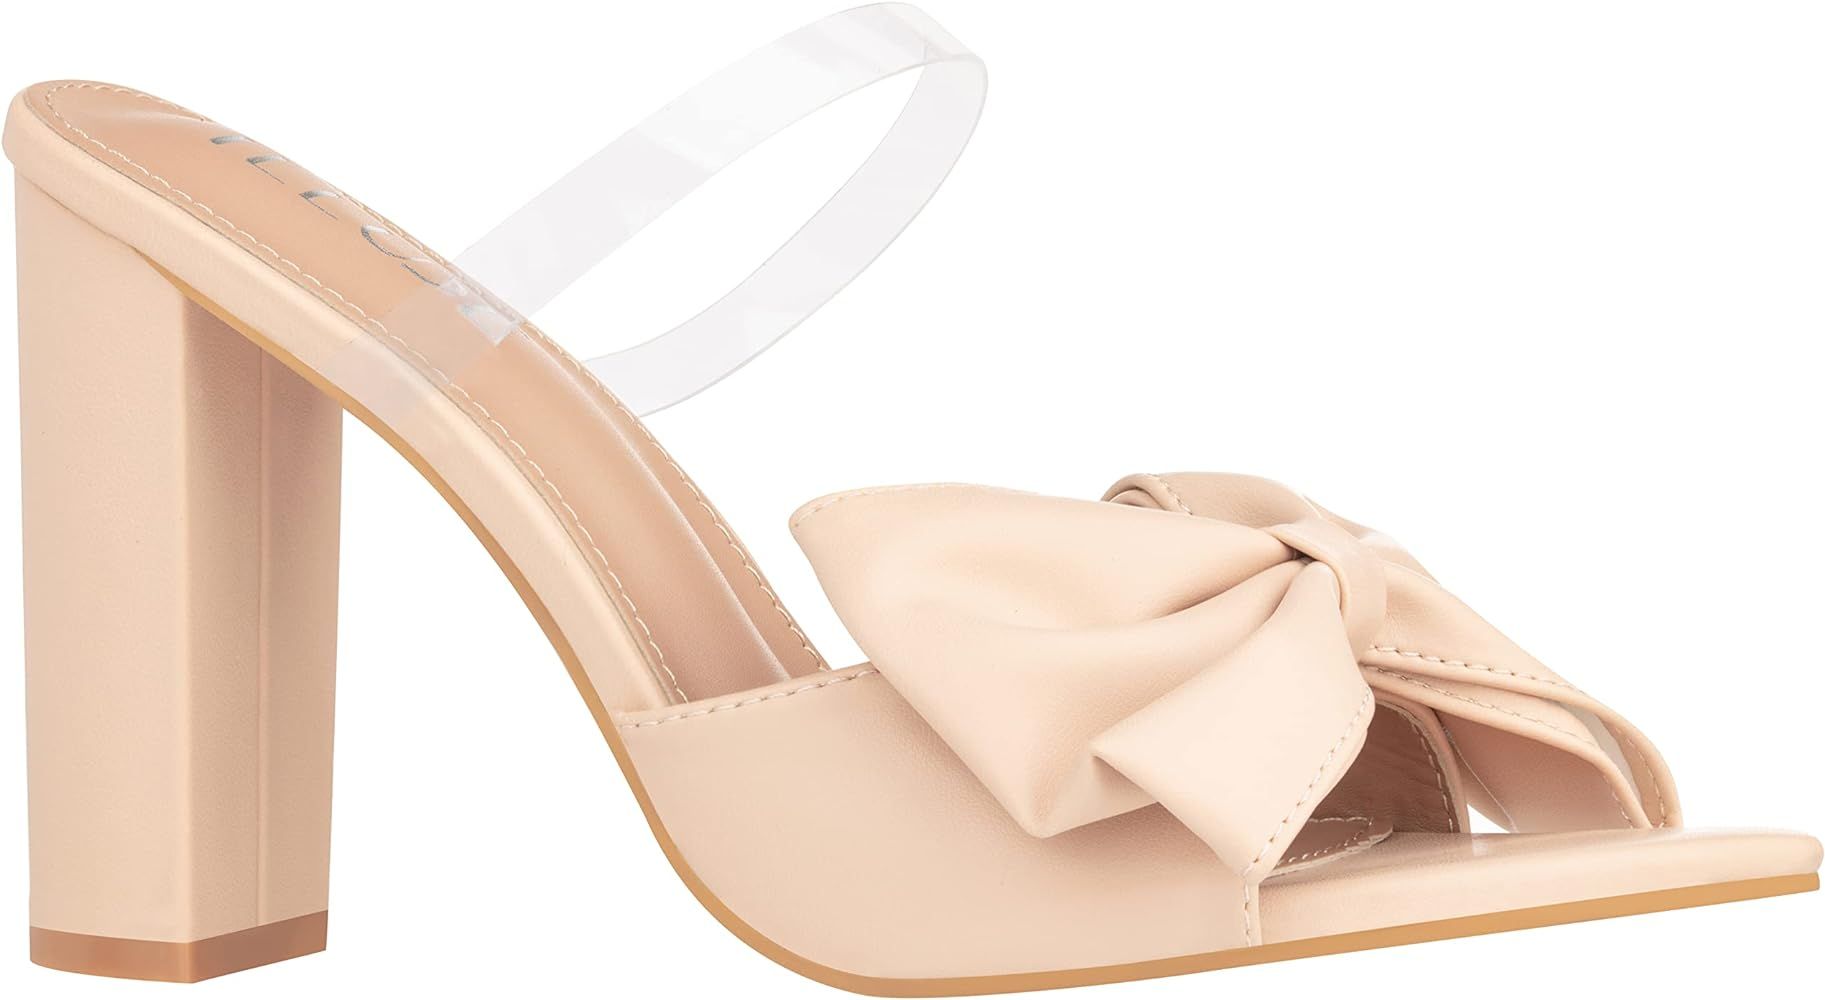 ILLUDE Women’s Chunky Block Heel with Bow Clear Pointed Toe Heeled Sandal Slip On Mule - Rosa | Amazon (US)